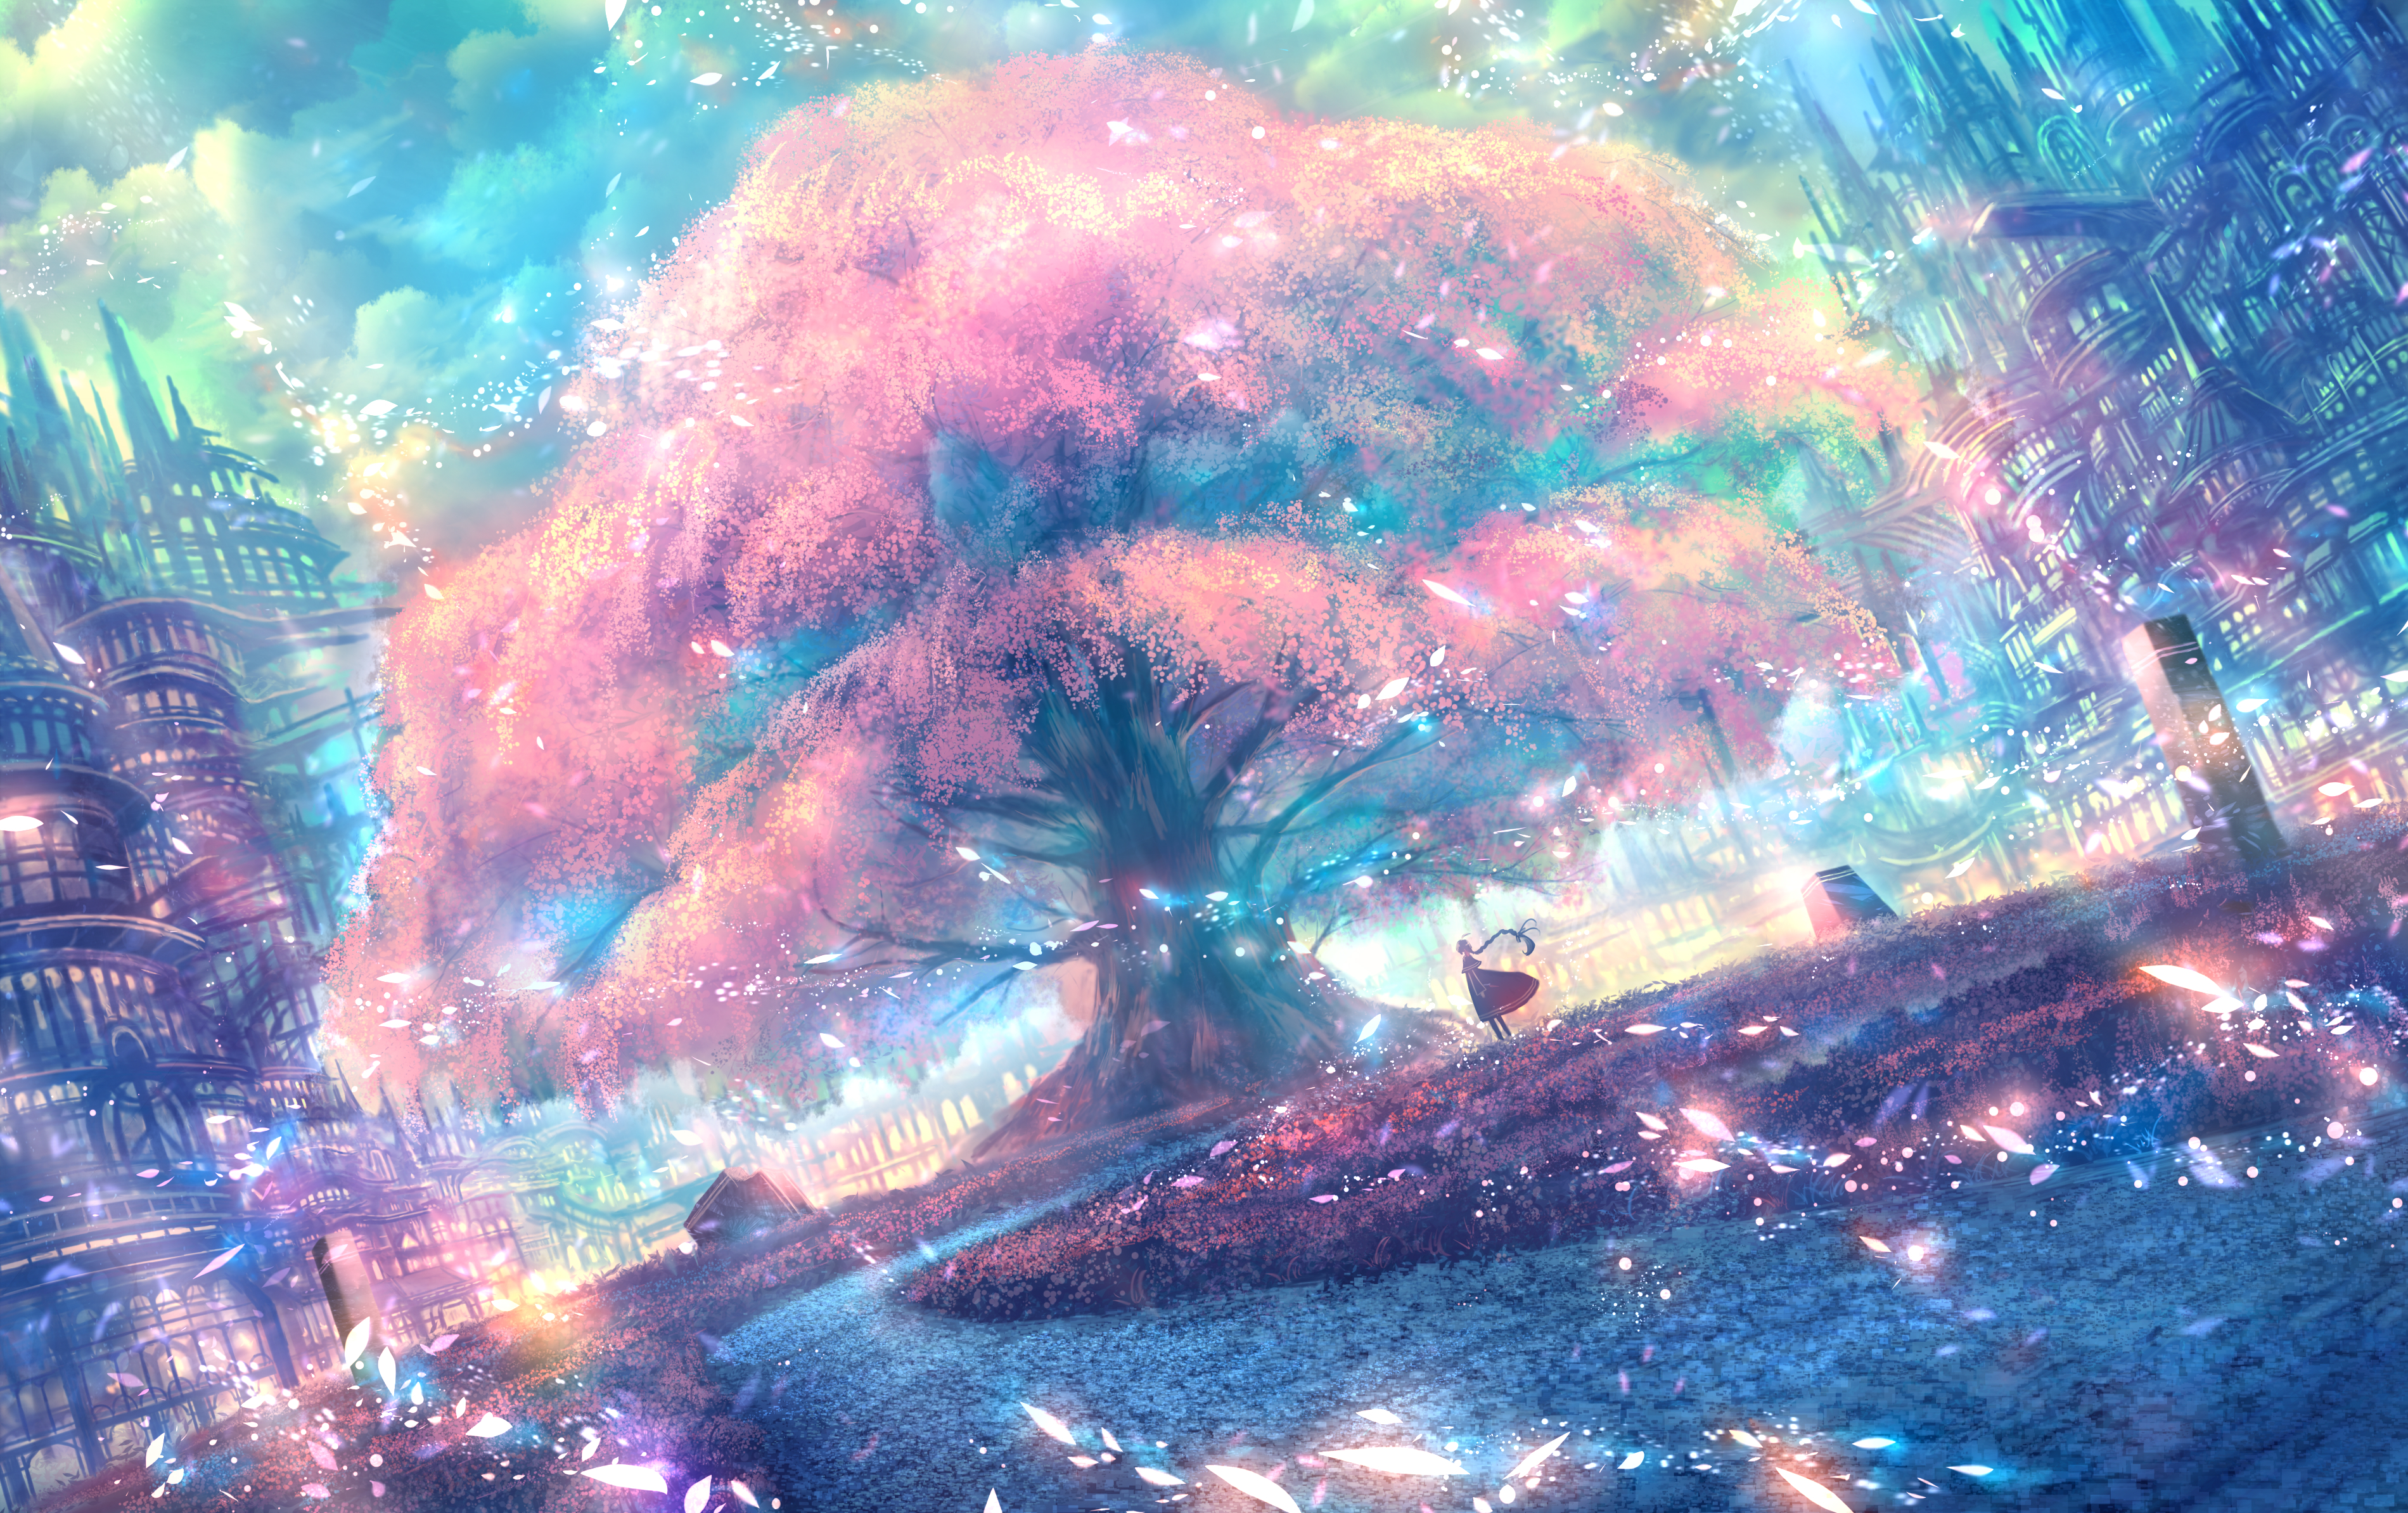 Cherry Blossom Tree  Cherry Blossom Anime Tree Drawing HD Png Download   1161x1306134495  PngFind